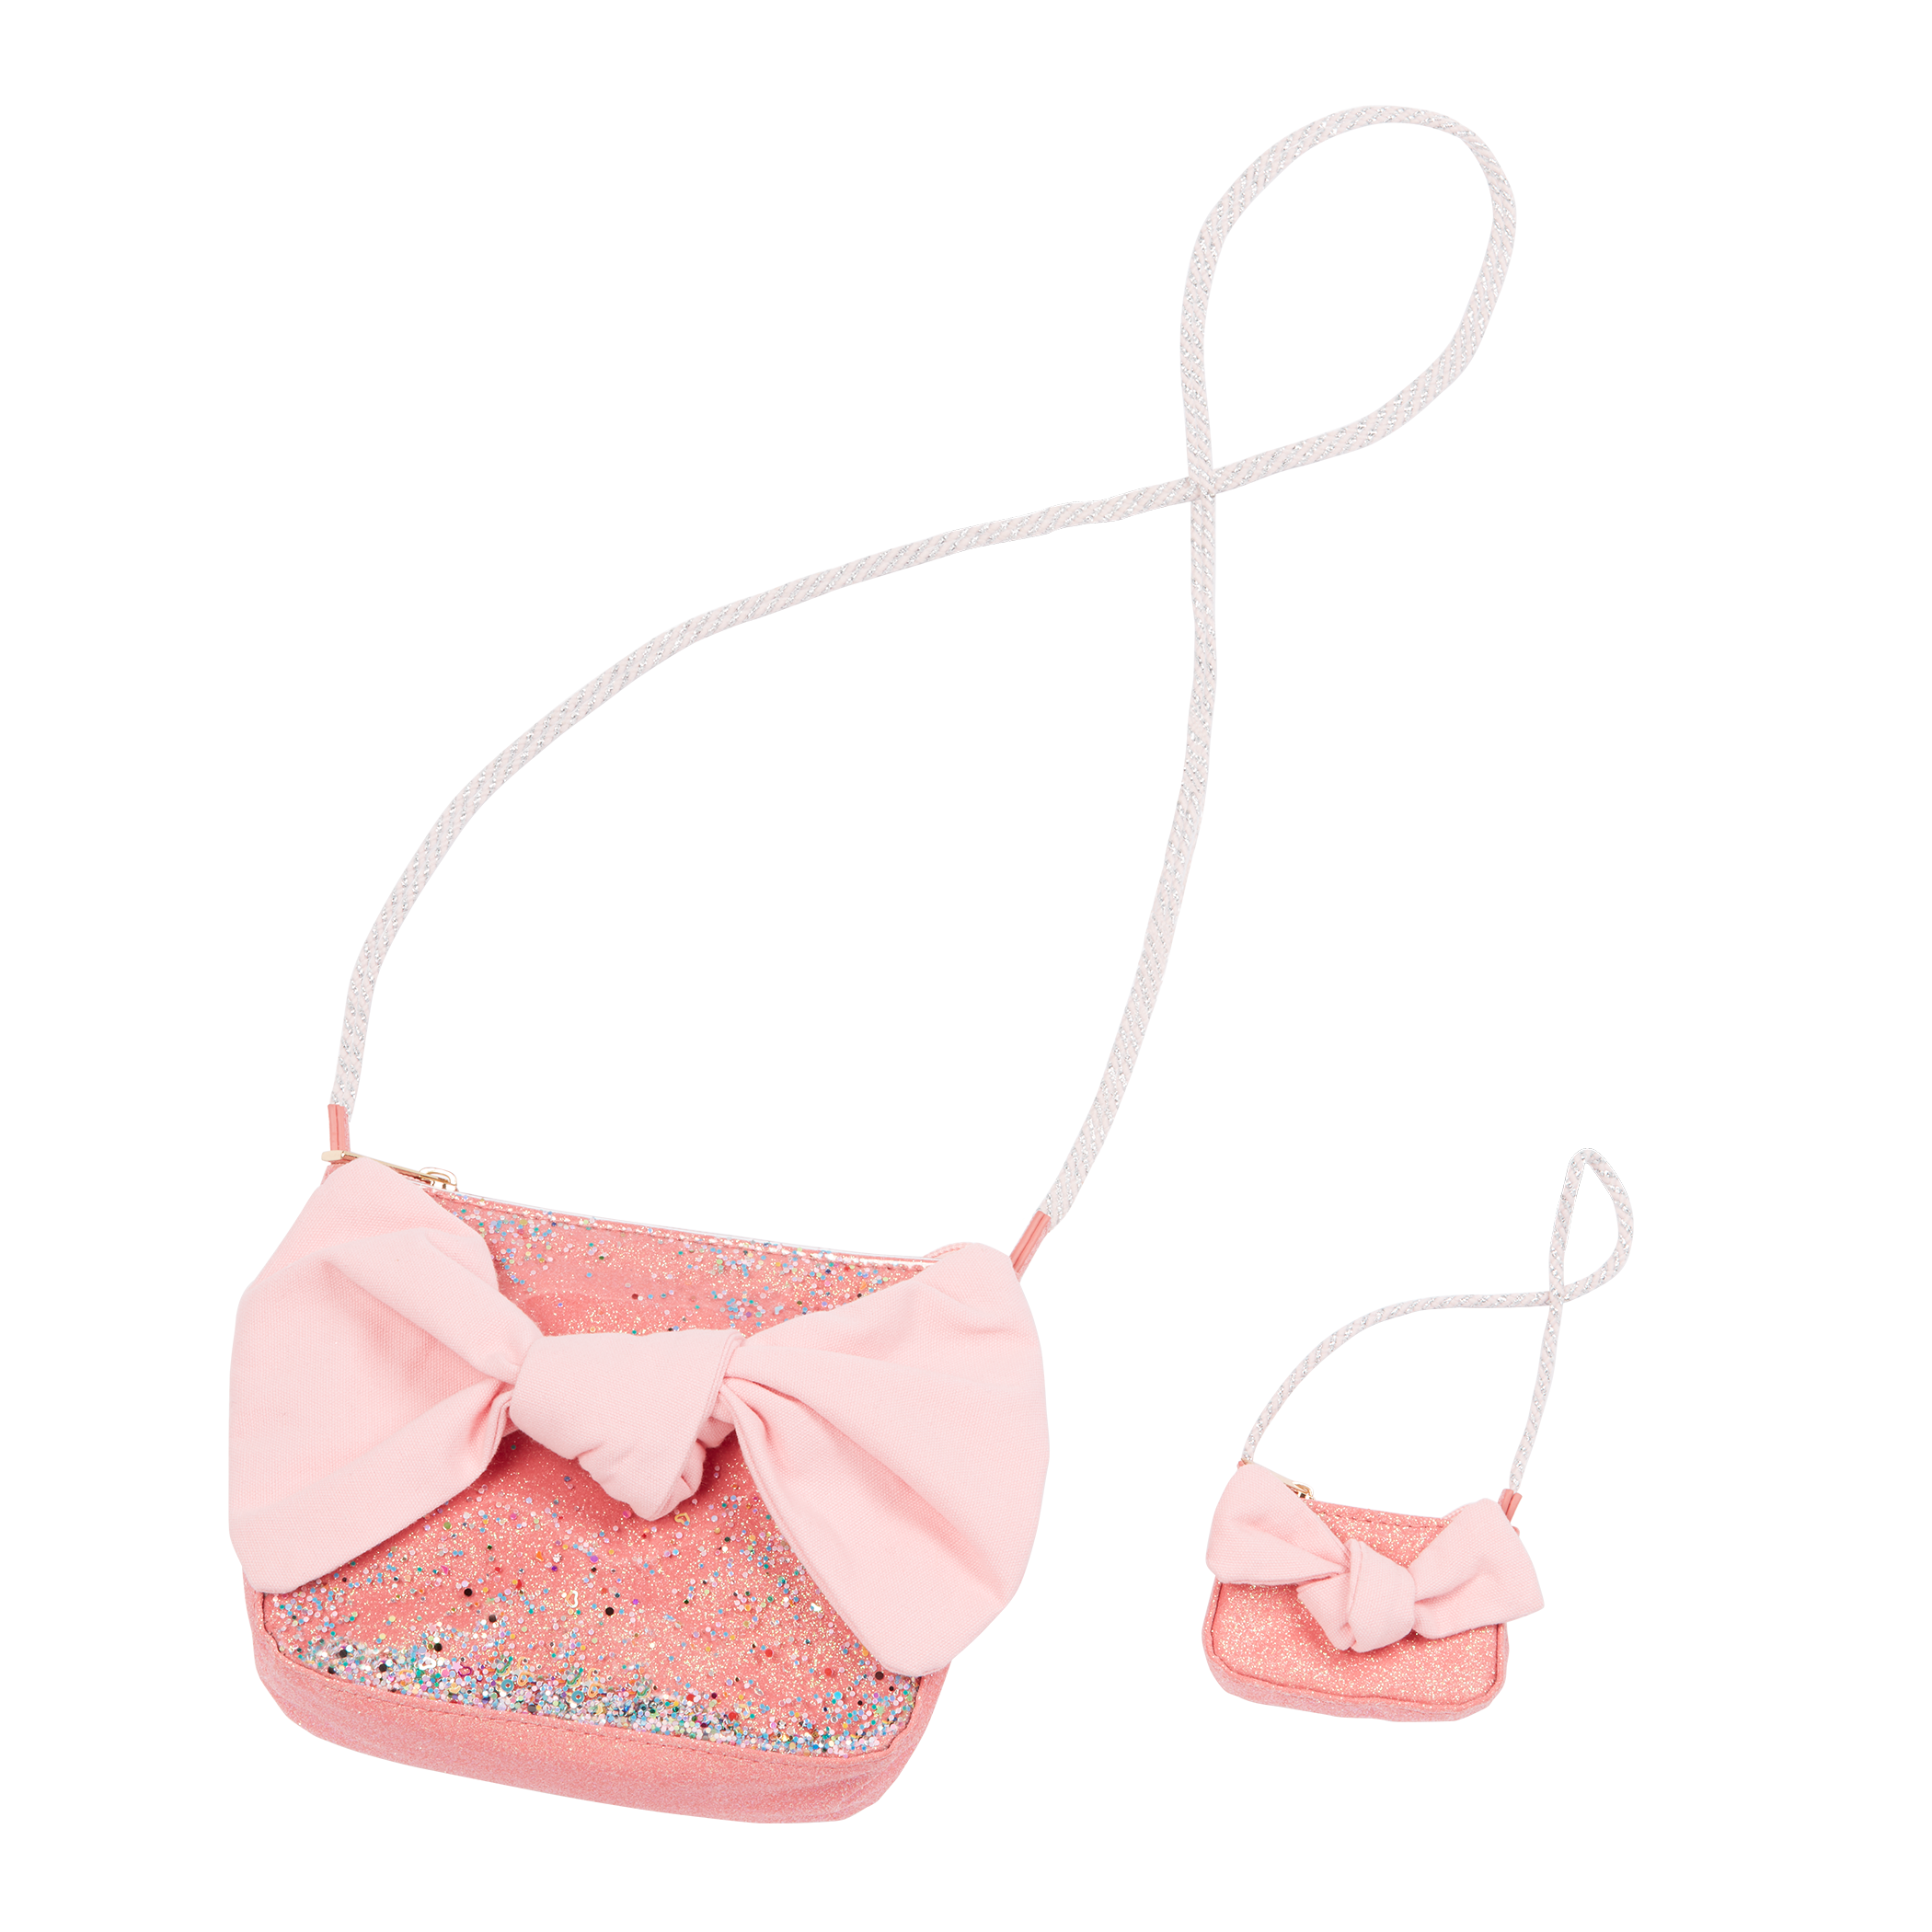 Found this adorable ita style Kuromi bag to display my dollie's!💕 : r/Dolls